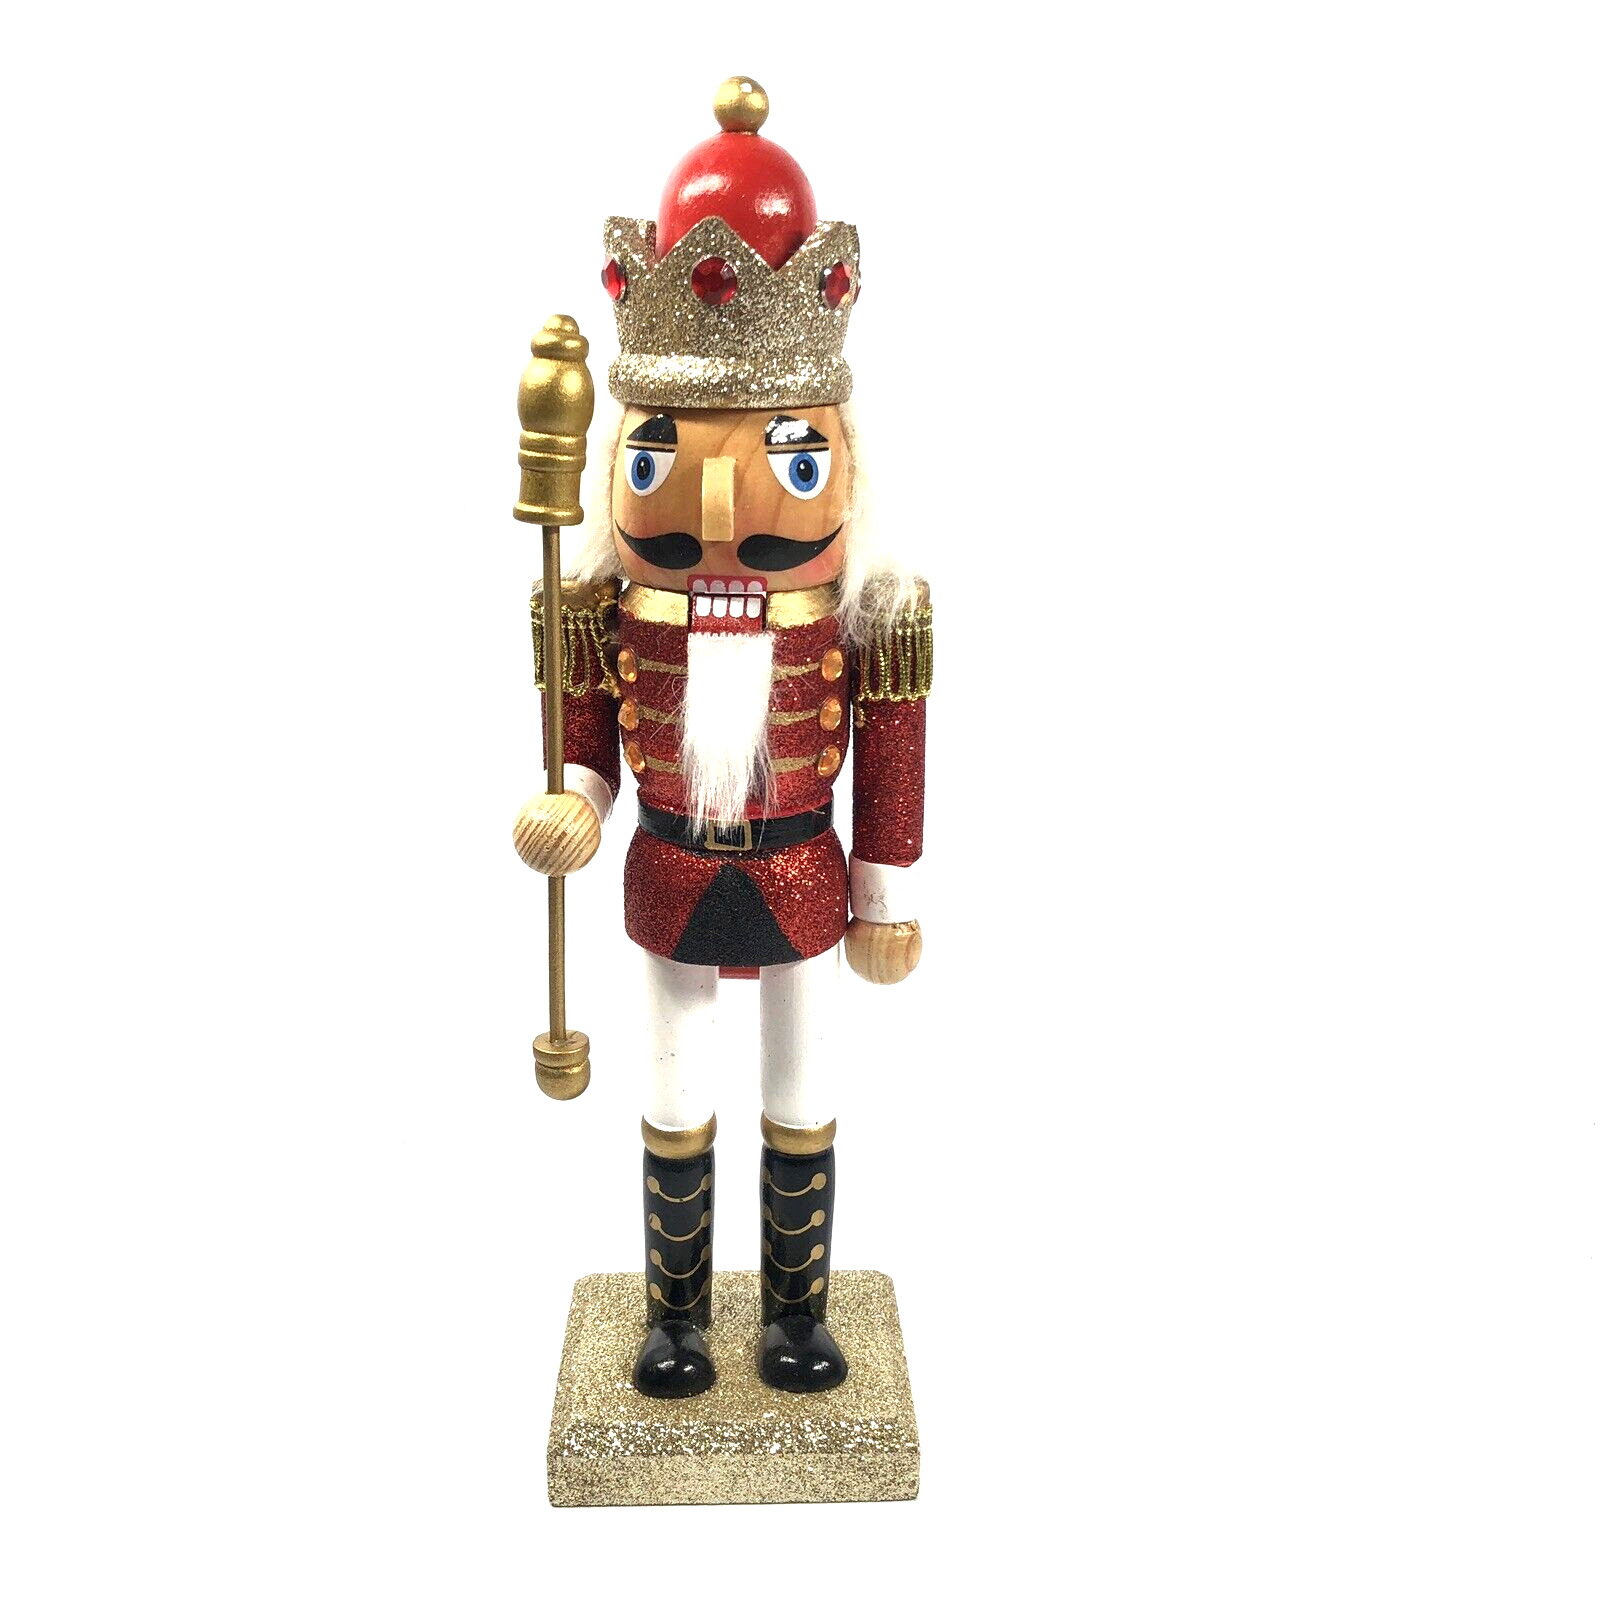 10” Hand painted  Wood Nutcracker, Lifestyle Studios..Holiday collection.